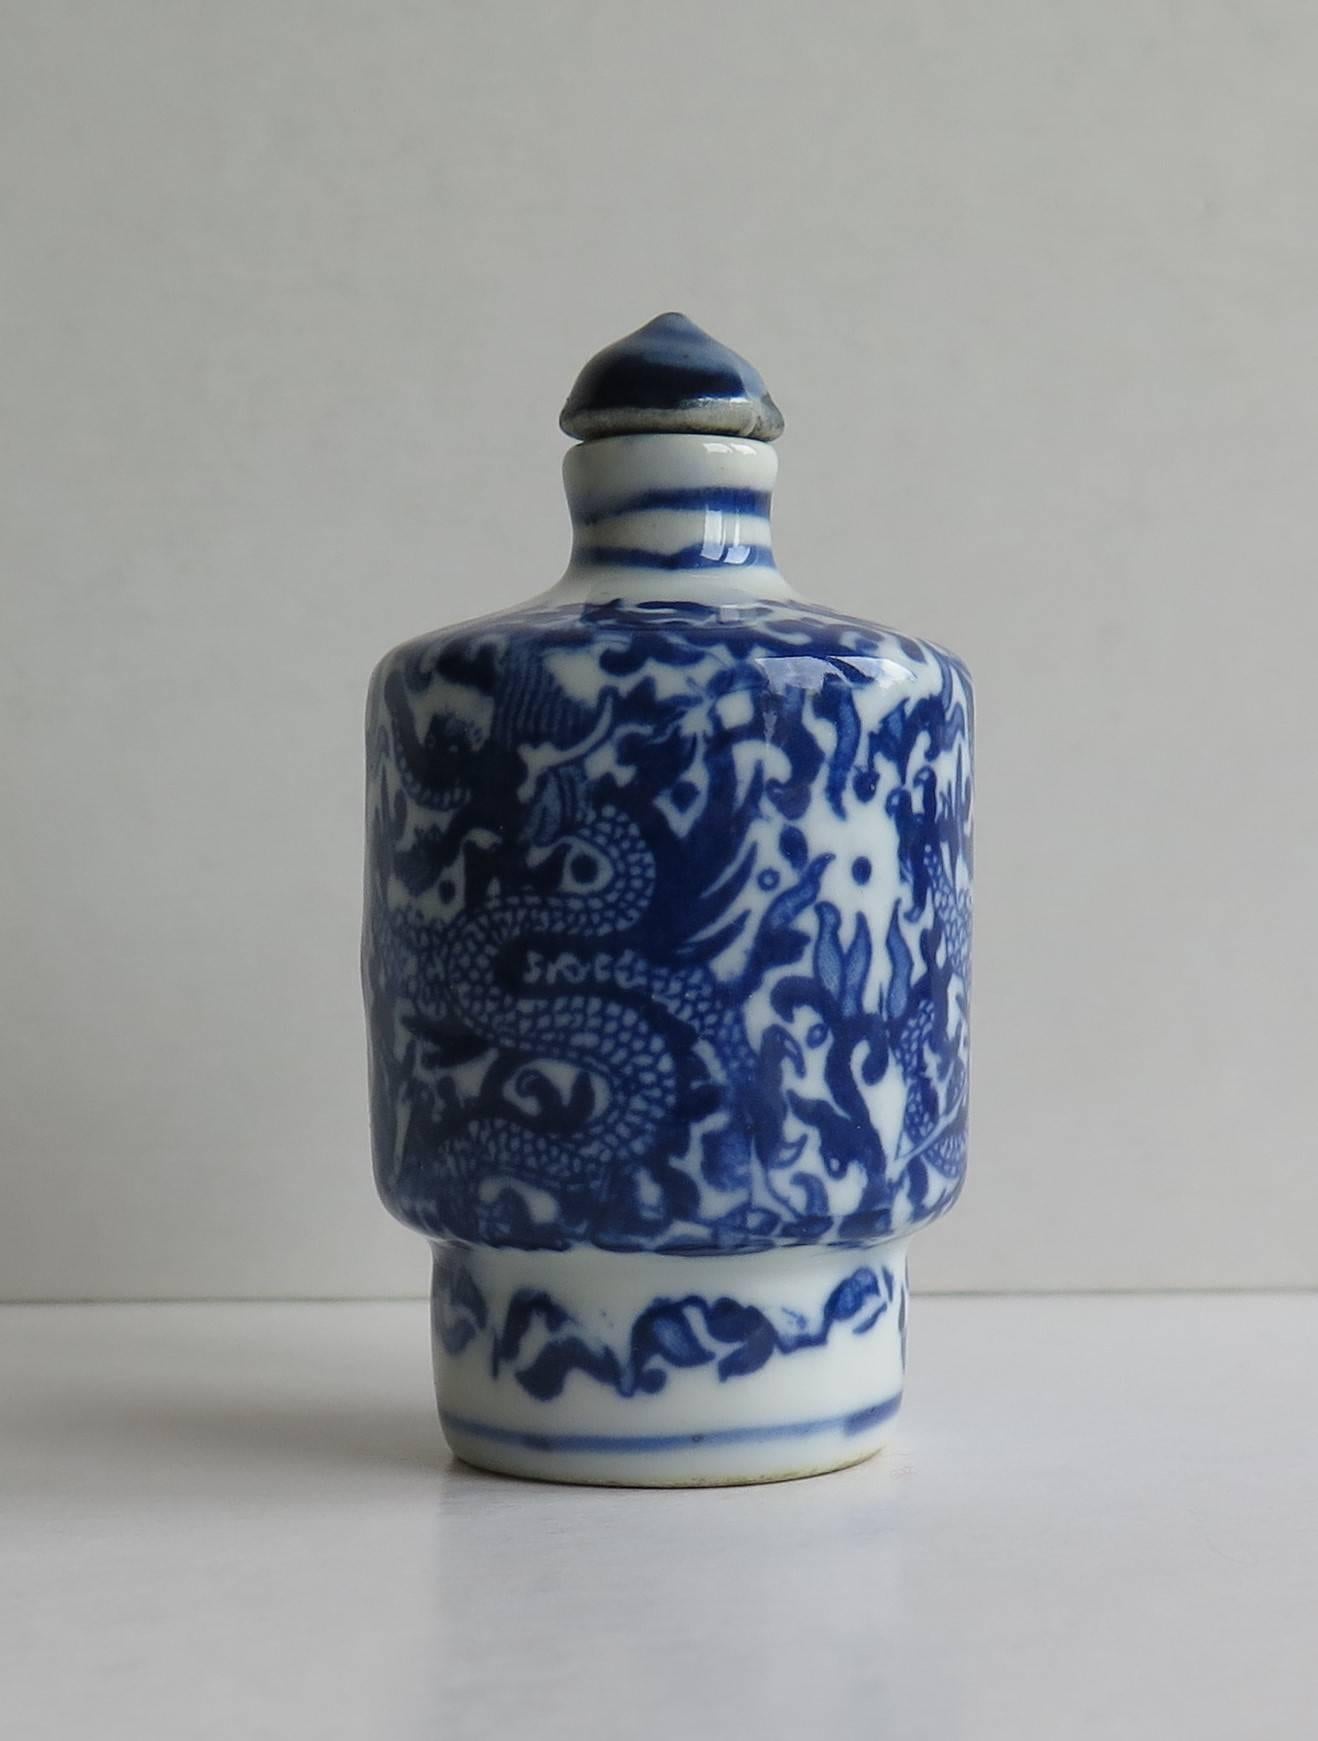 20th Century Chinese Porcelain Snuff Bottle Blue and White Hand-Painted Dragons, circa 1925